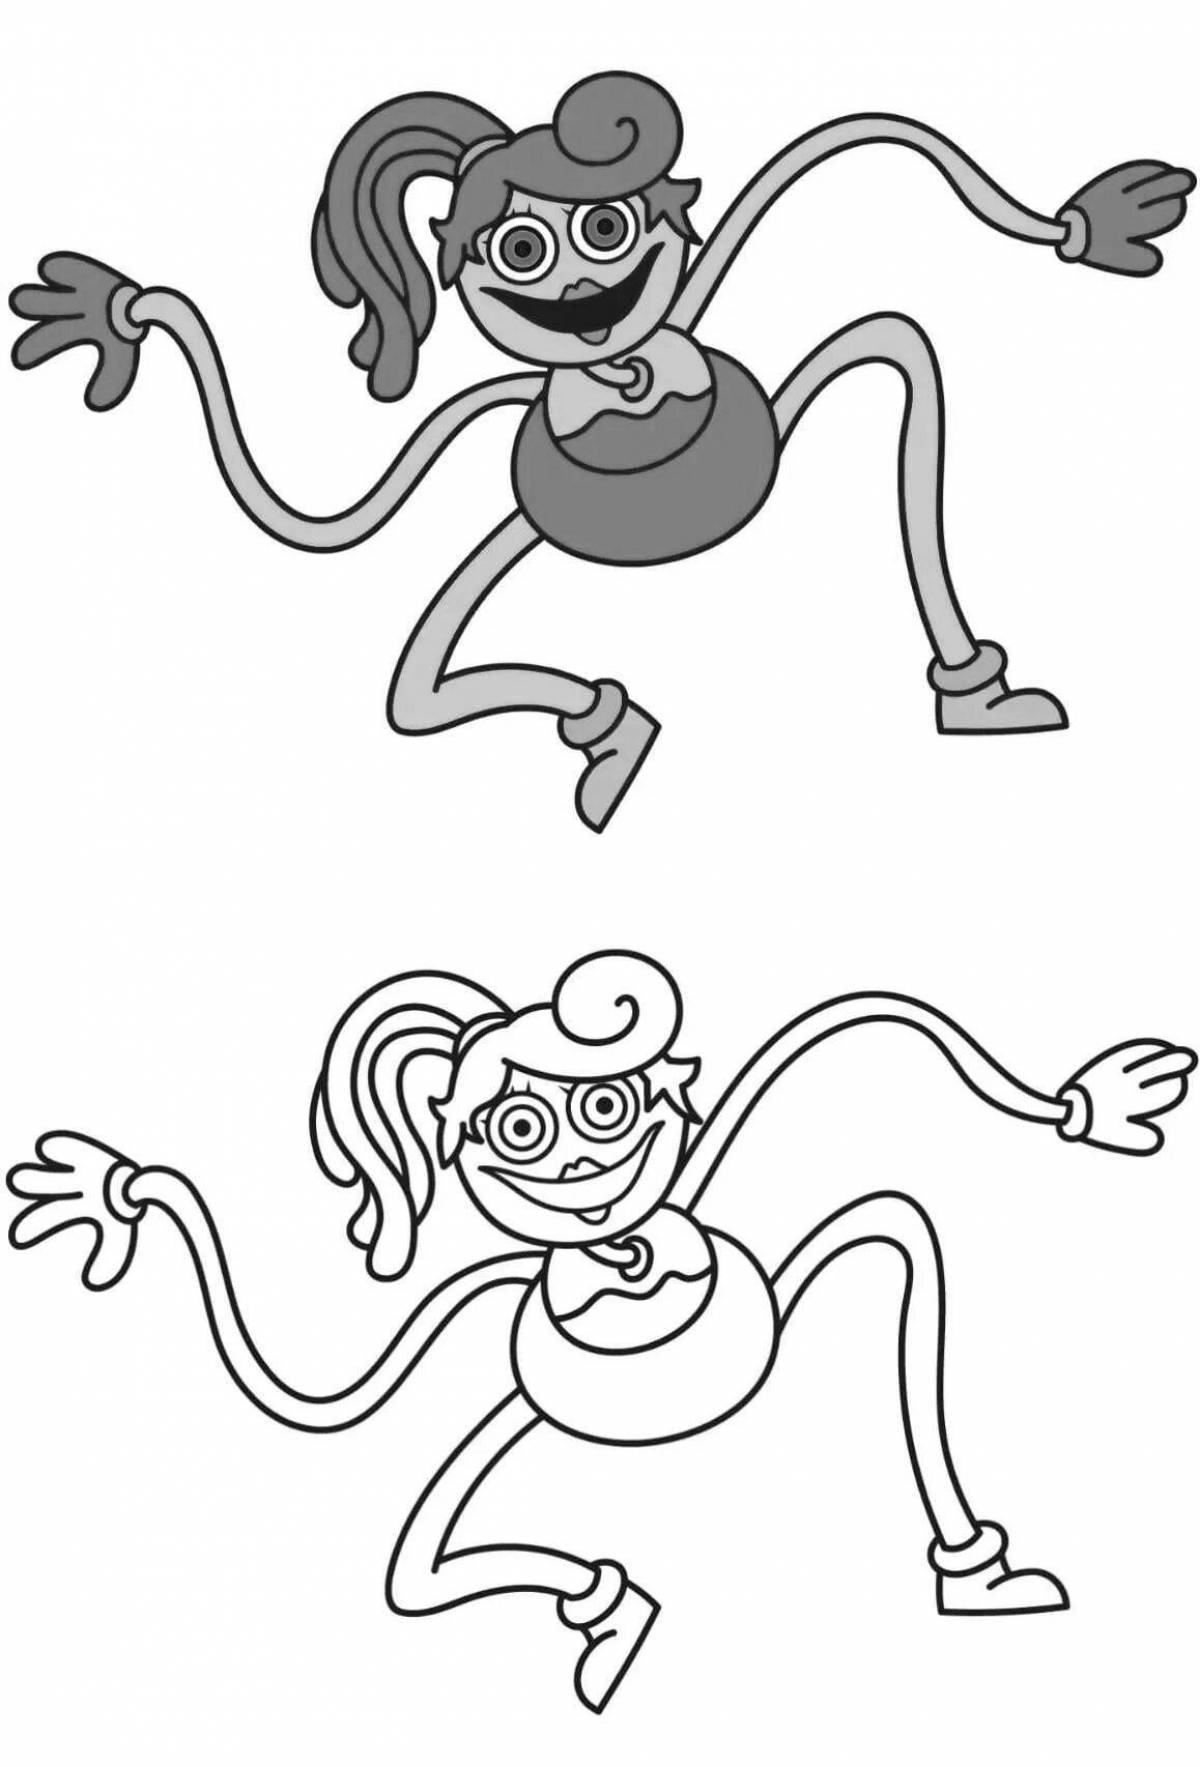 Coloring page charming mommy with long legs